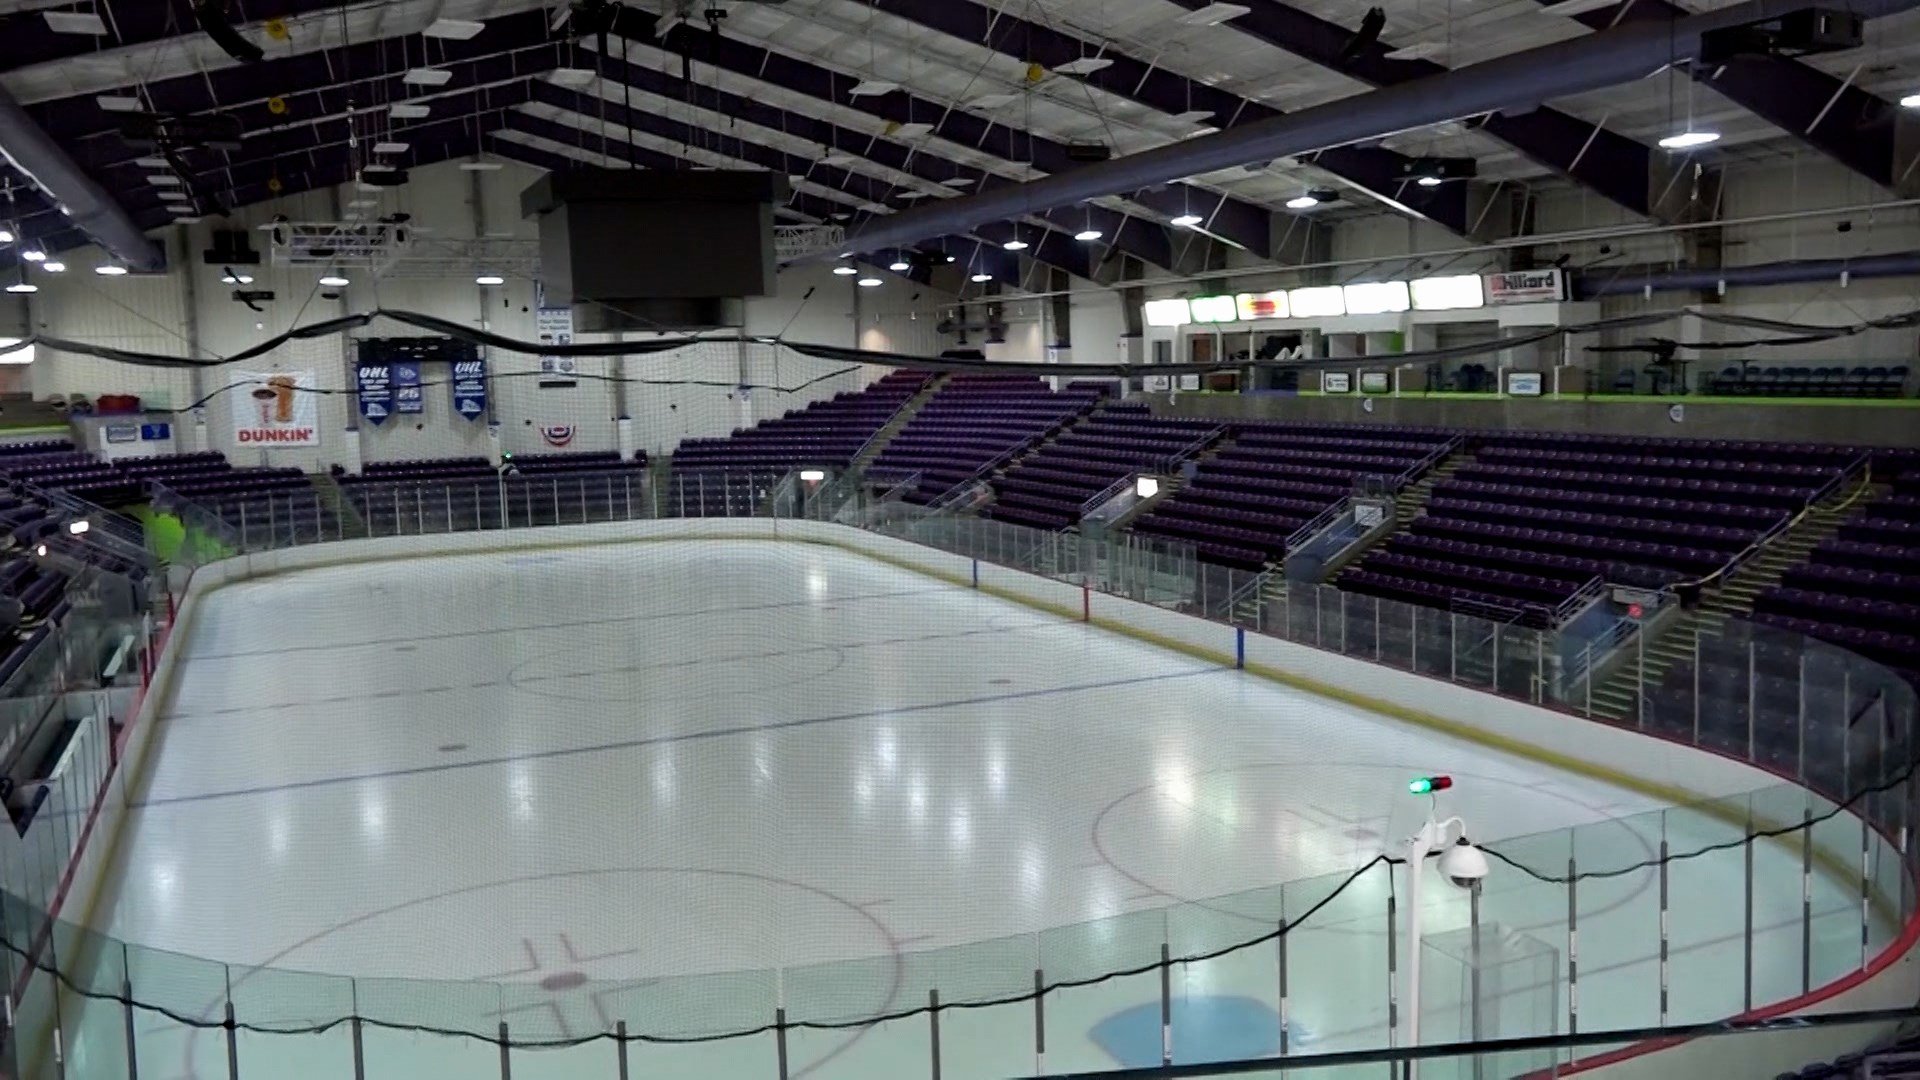 Elmira River Sharks tickets to be sold on Ticketmaster